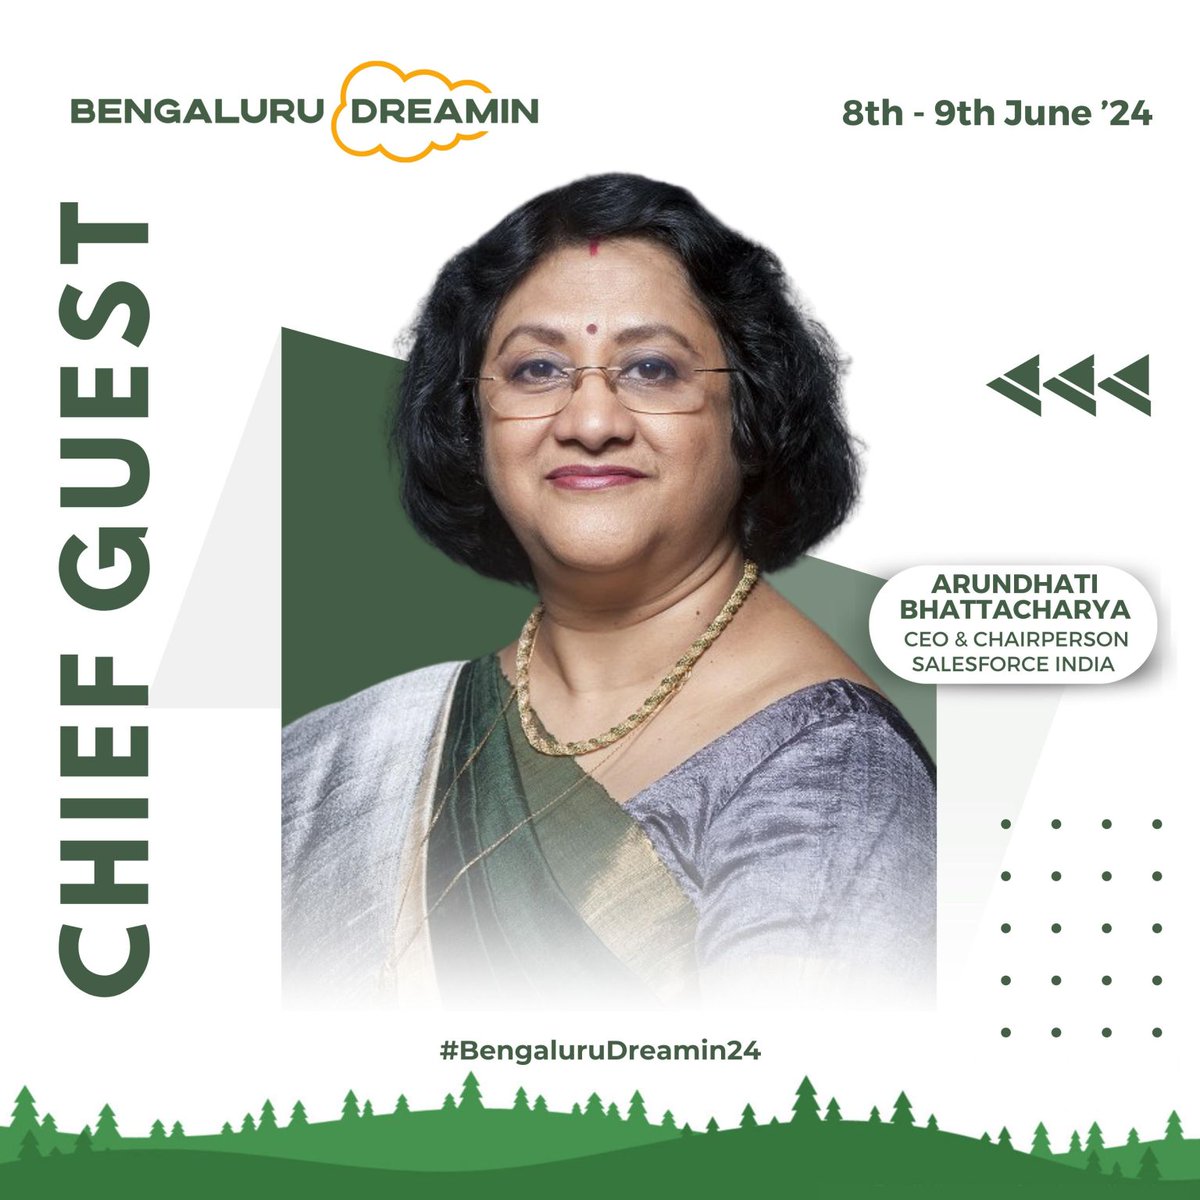 We're super excited to share that for the very first time Arundhati Bhattacharya, Chairperson & CEO, of Salesforce India, is attending an in-person Salesforce community conference - @BnglrDreamin More details 👇 linkedin.com/posts/bengalur… #BengaluruDreamin24 #Salesforce